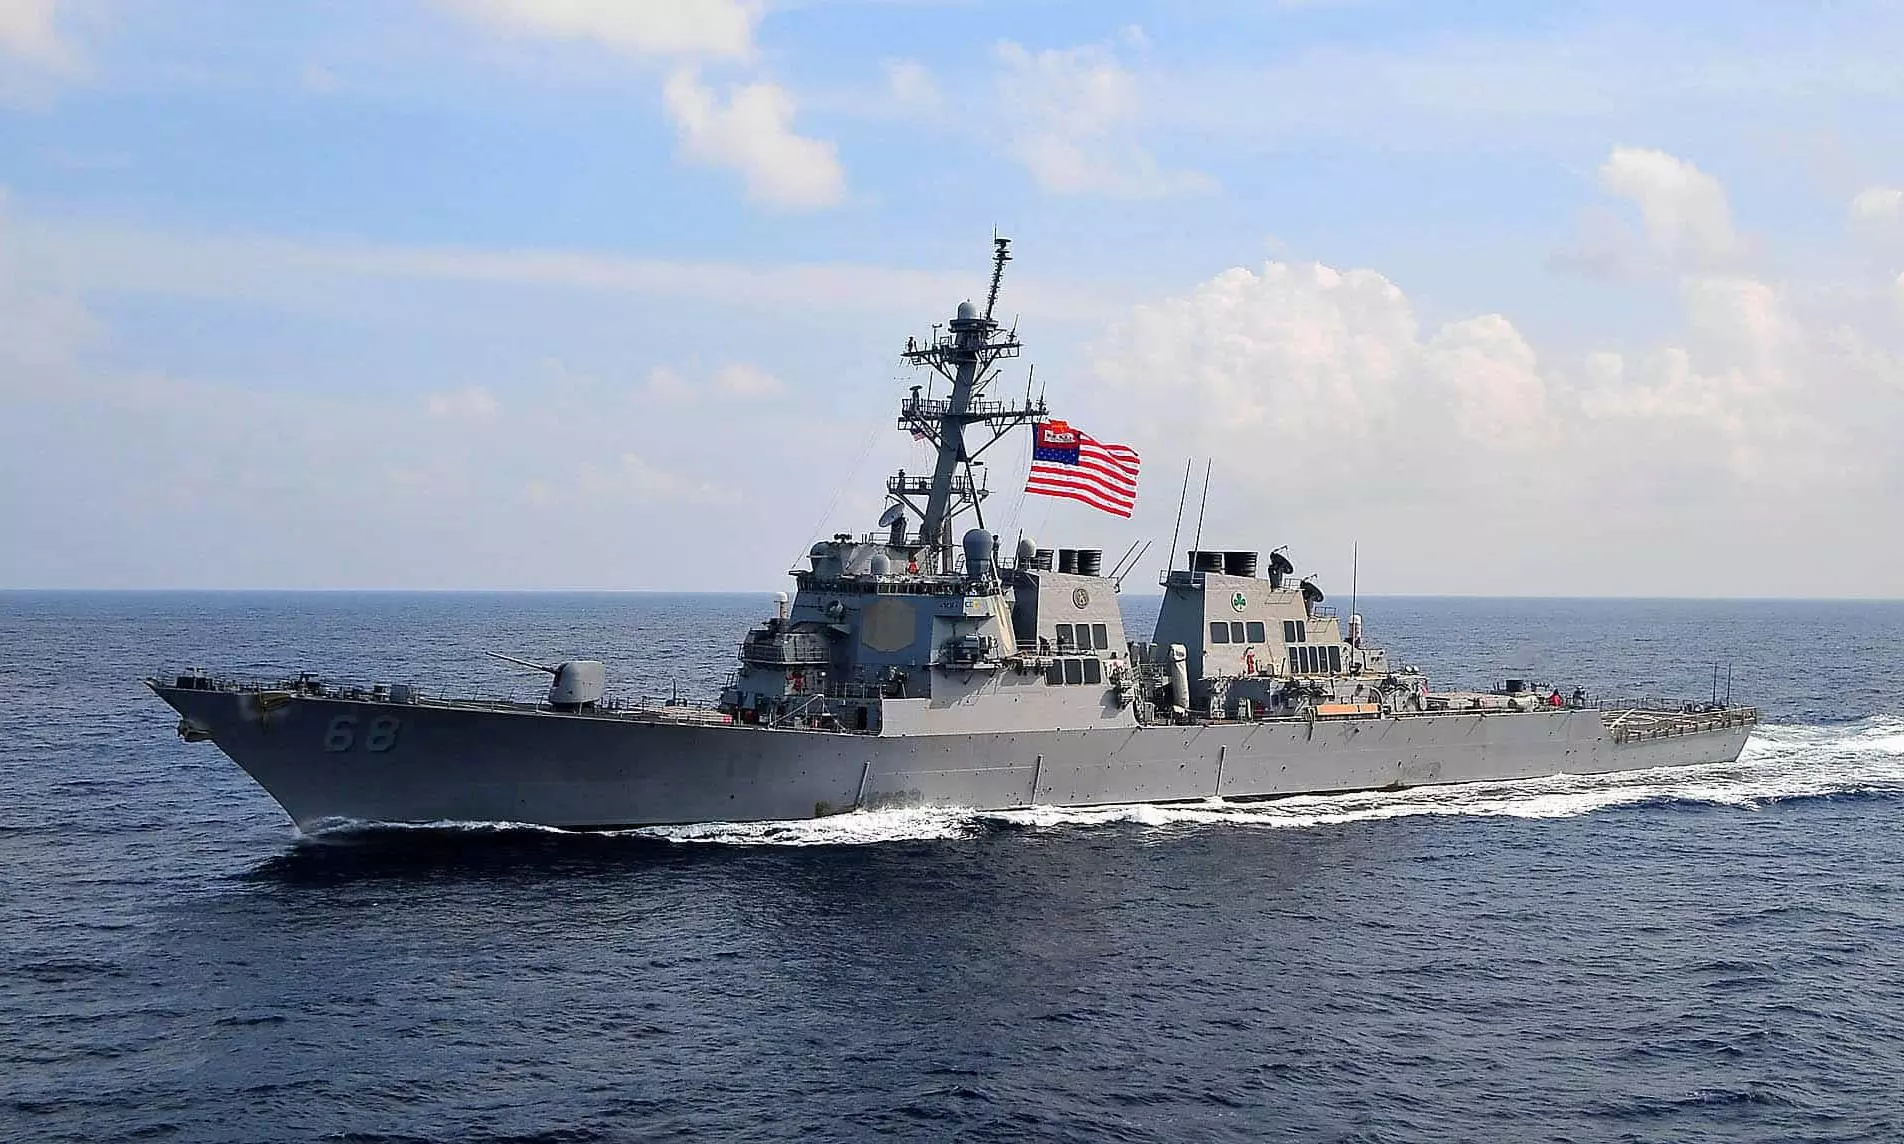 U.S. Navy to secure Red Sea passage, uncertainty increases